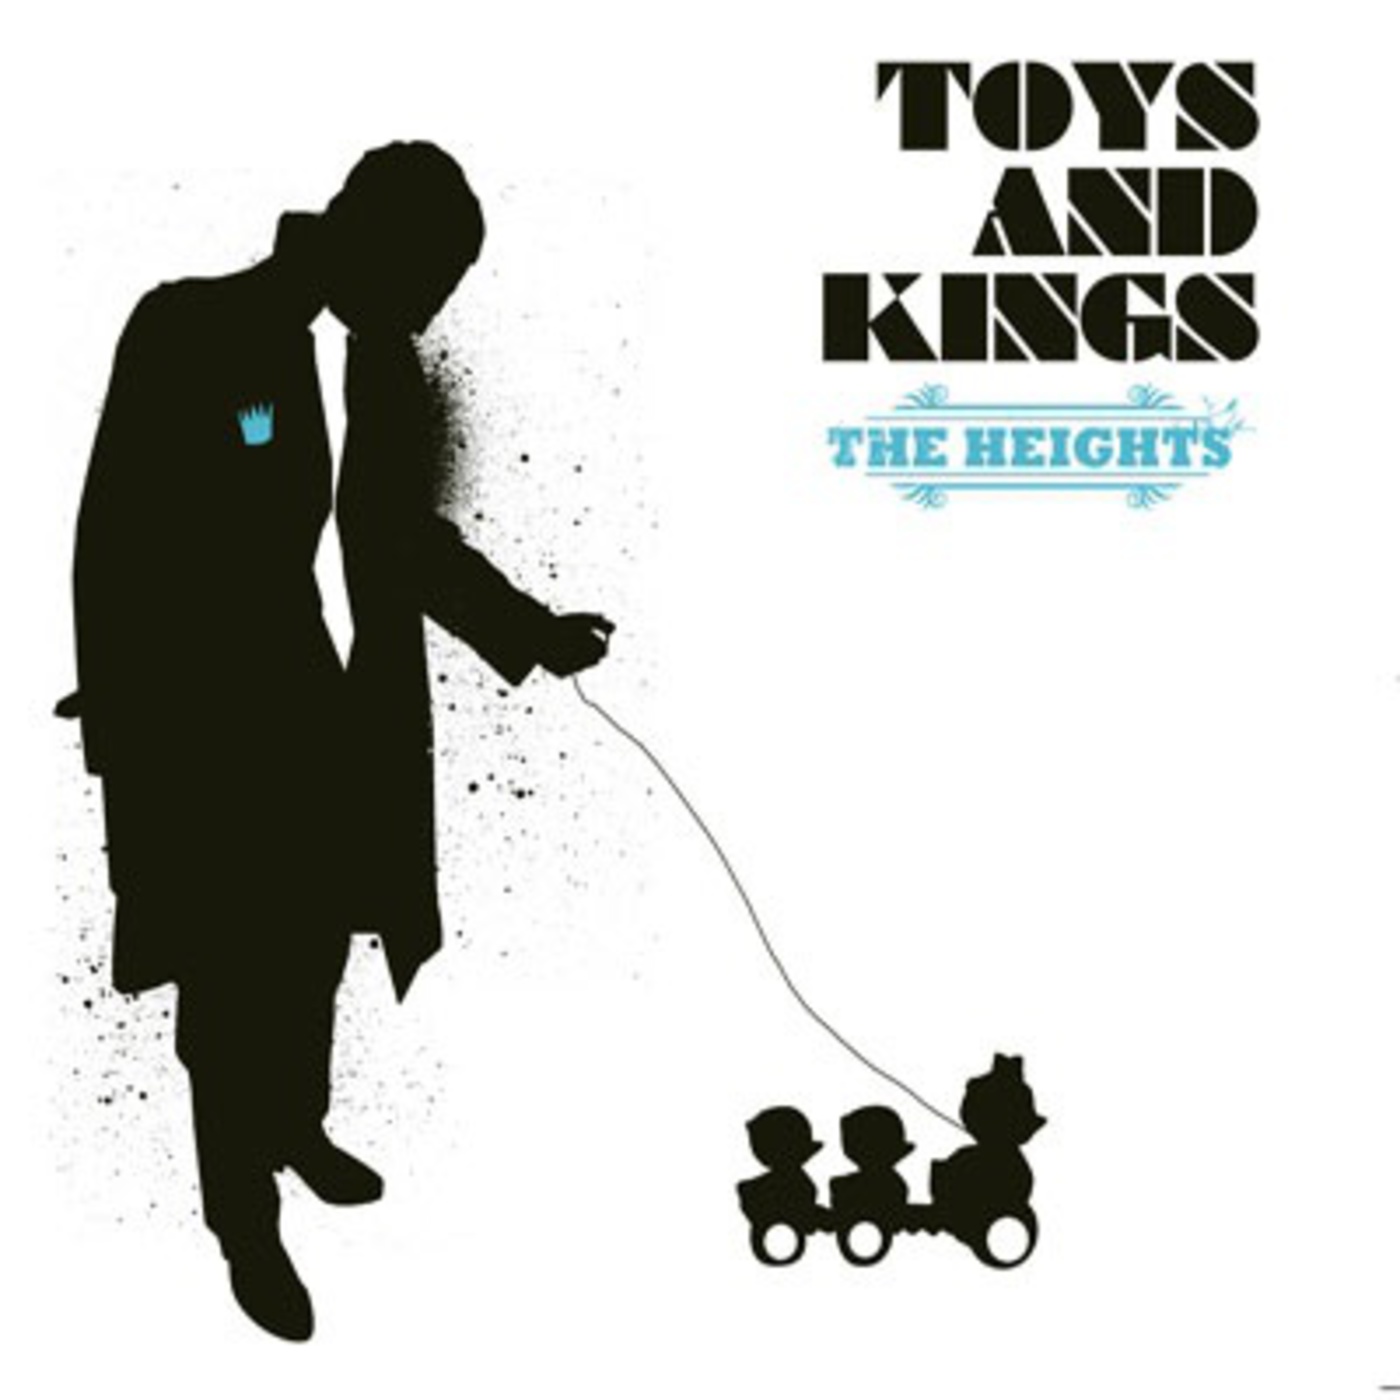 The Heights - Toys and Kings